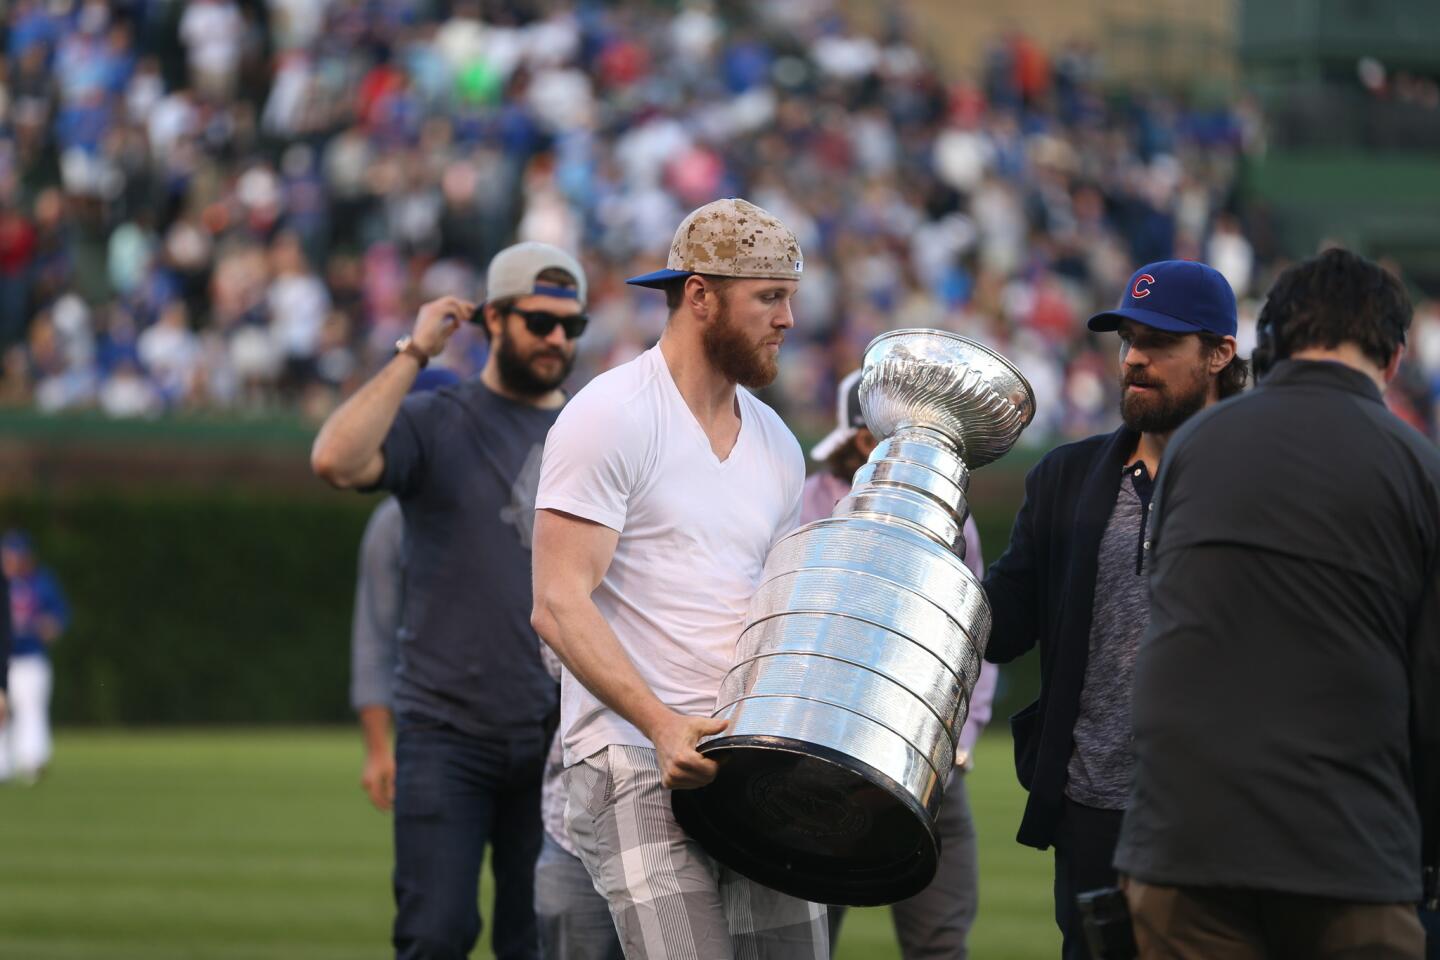 Blackhawks visit with Stanley Cup